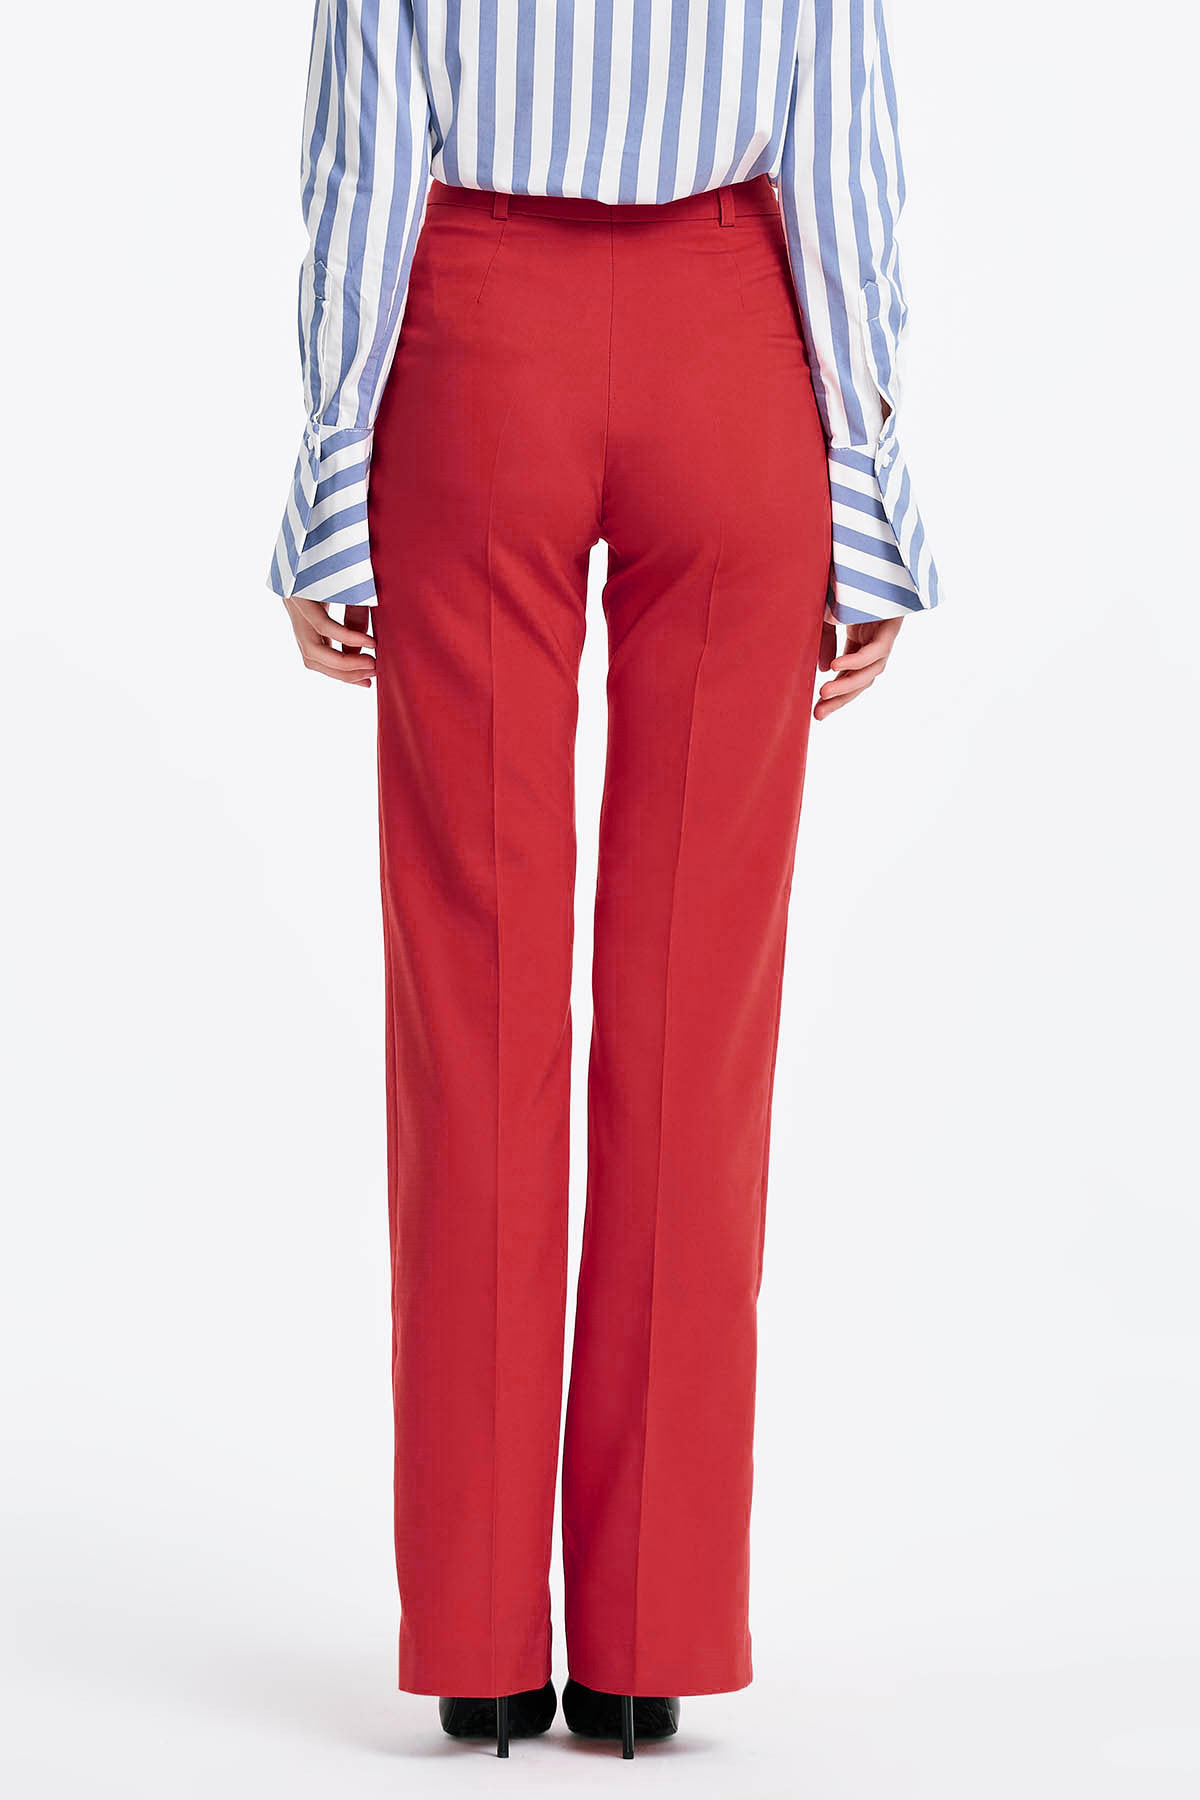 Red trousers, photo 3